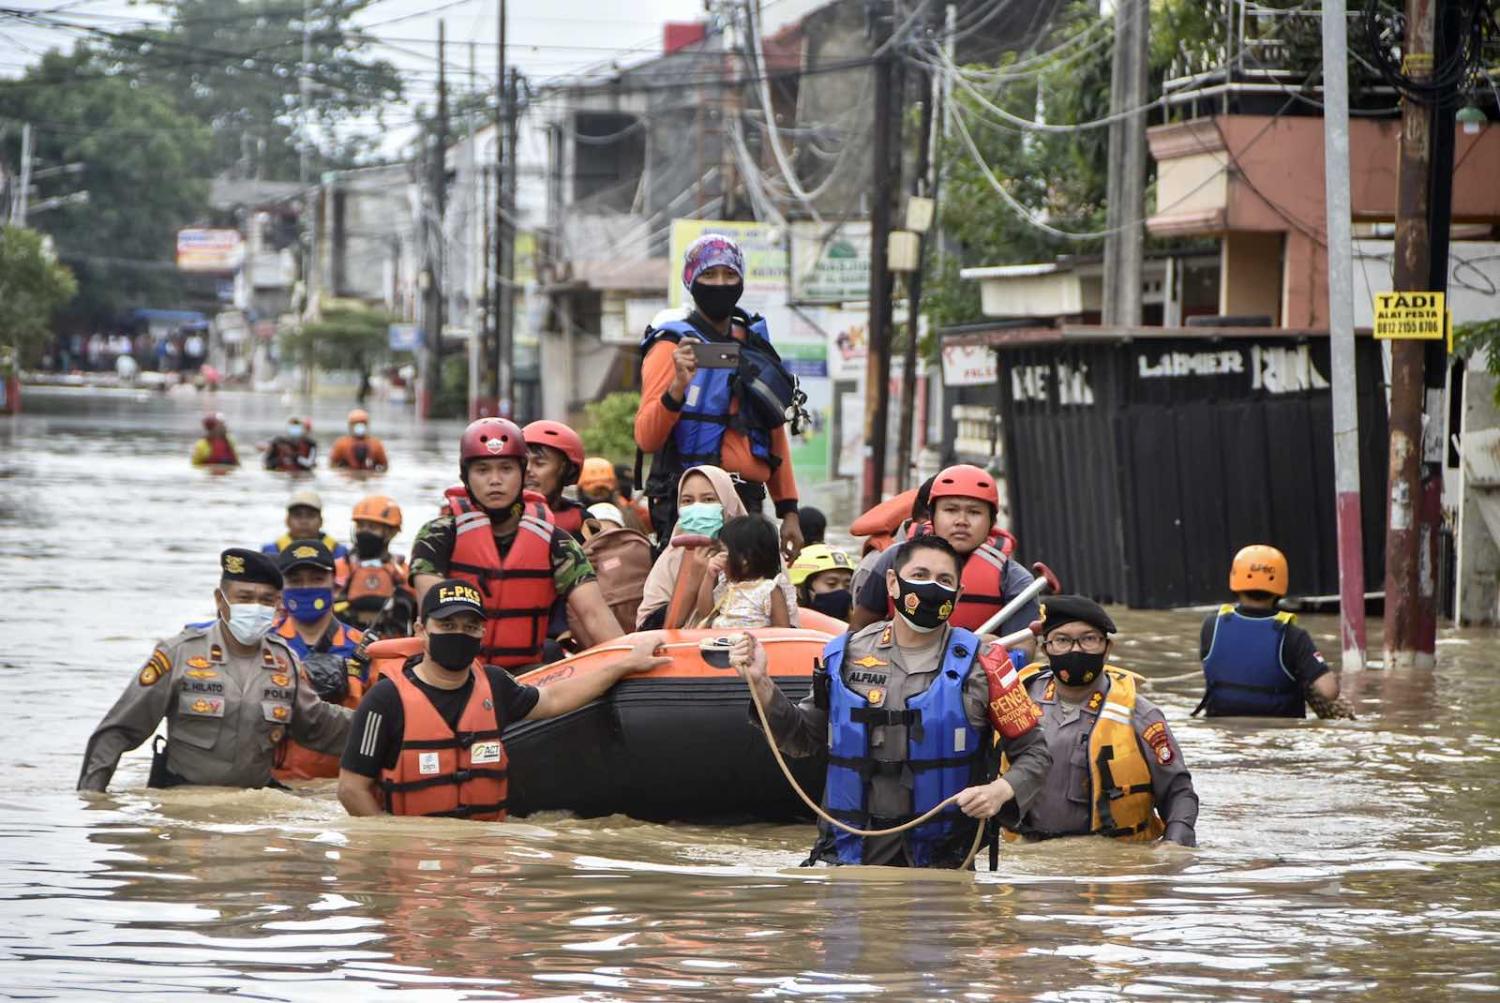 Rescuers evacuate residents from their flooded homes in Bekasi, Indonesia, 19 February 2021 (Rezas/AFP via Getty Images)